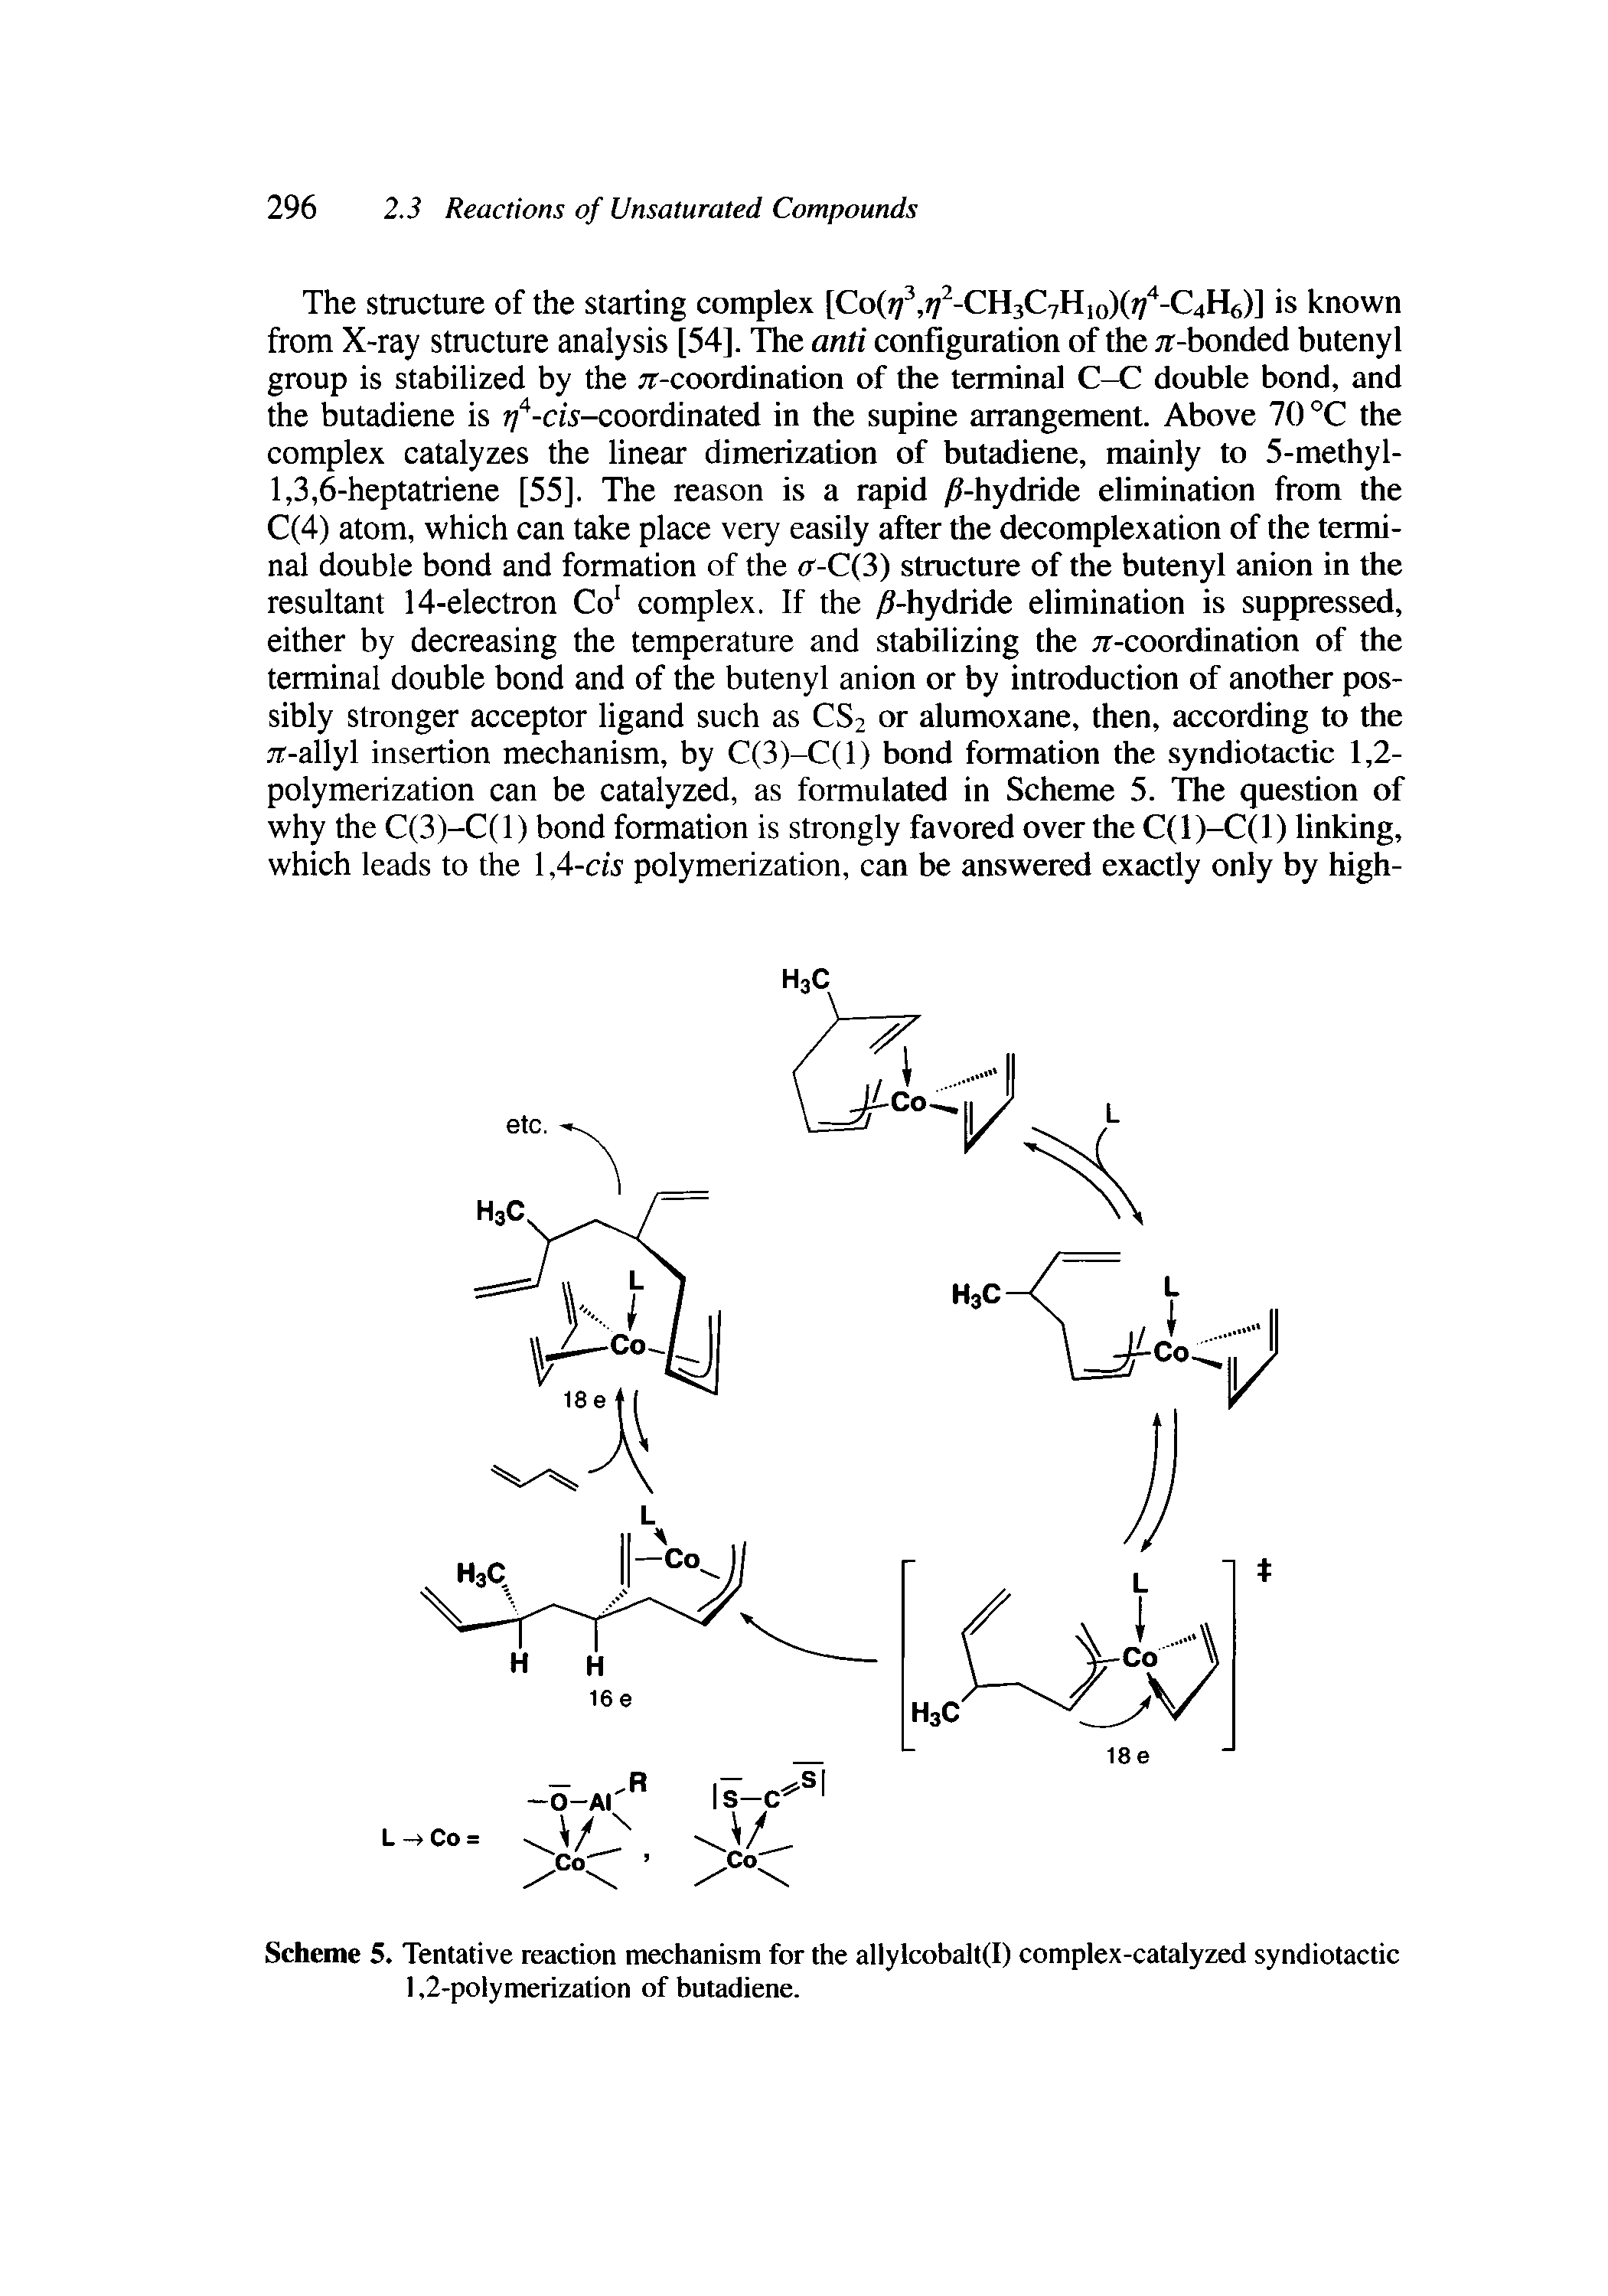 Scheme 5. Tentative reaction mechanism for the allylcobalt(I) complex-catalyzed syndiotactic 1,2-polymerization of butadiene.